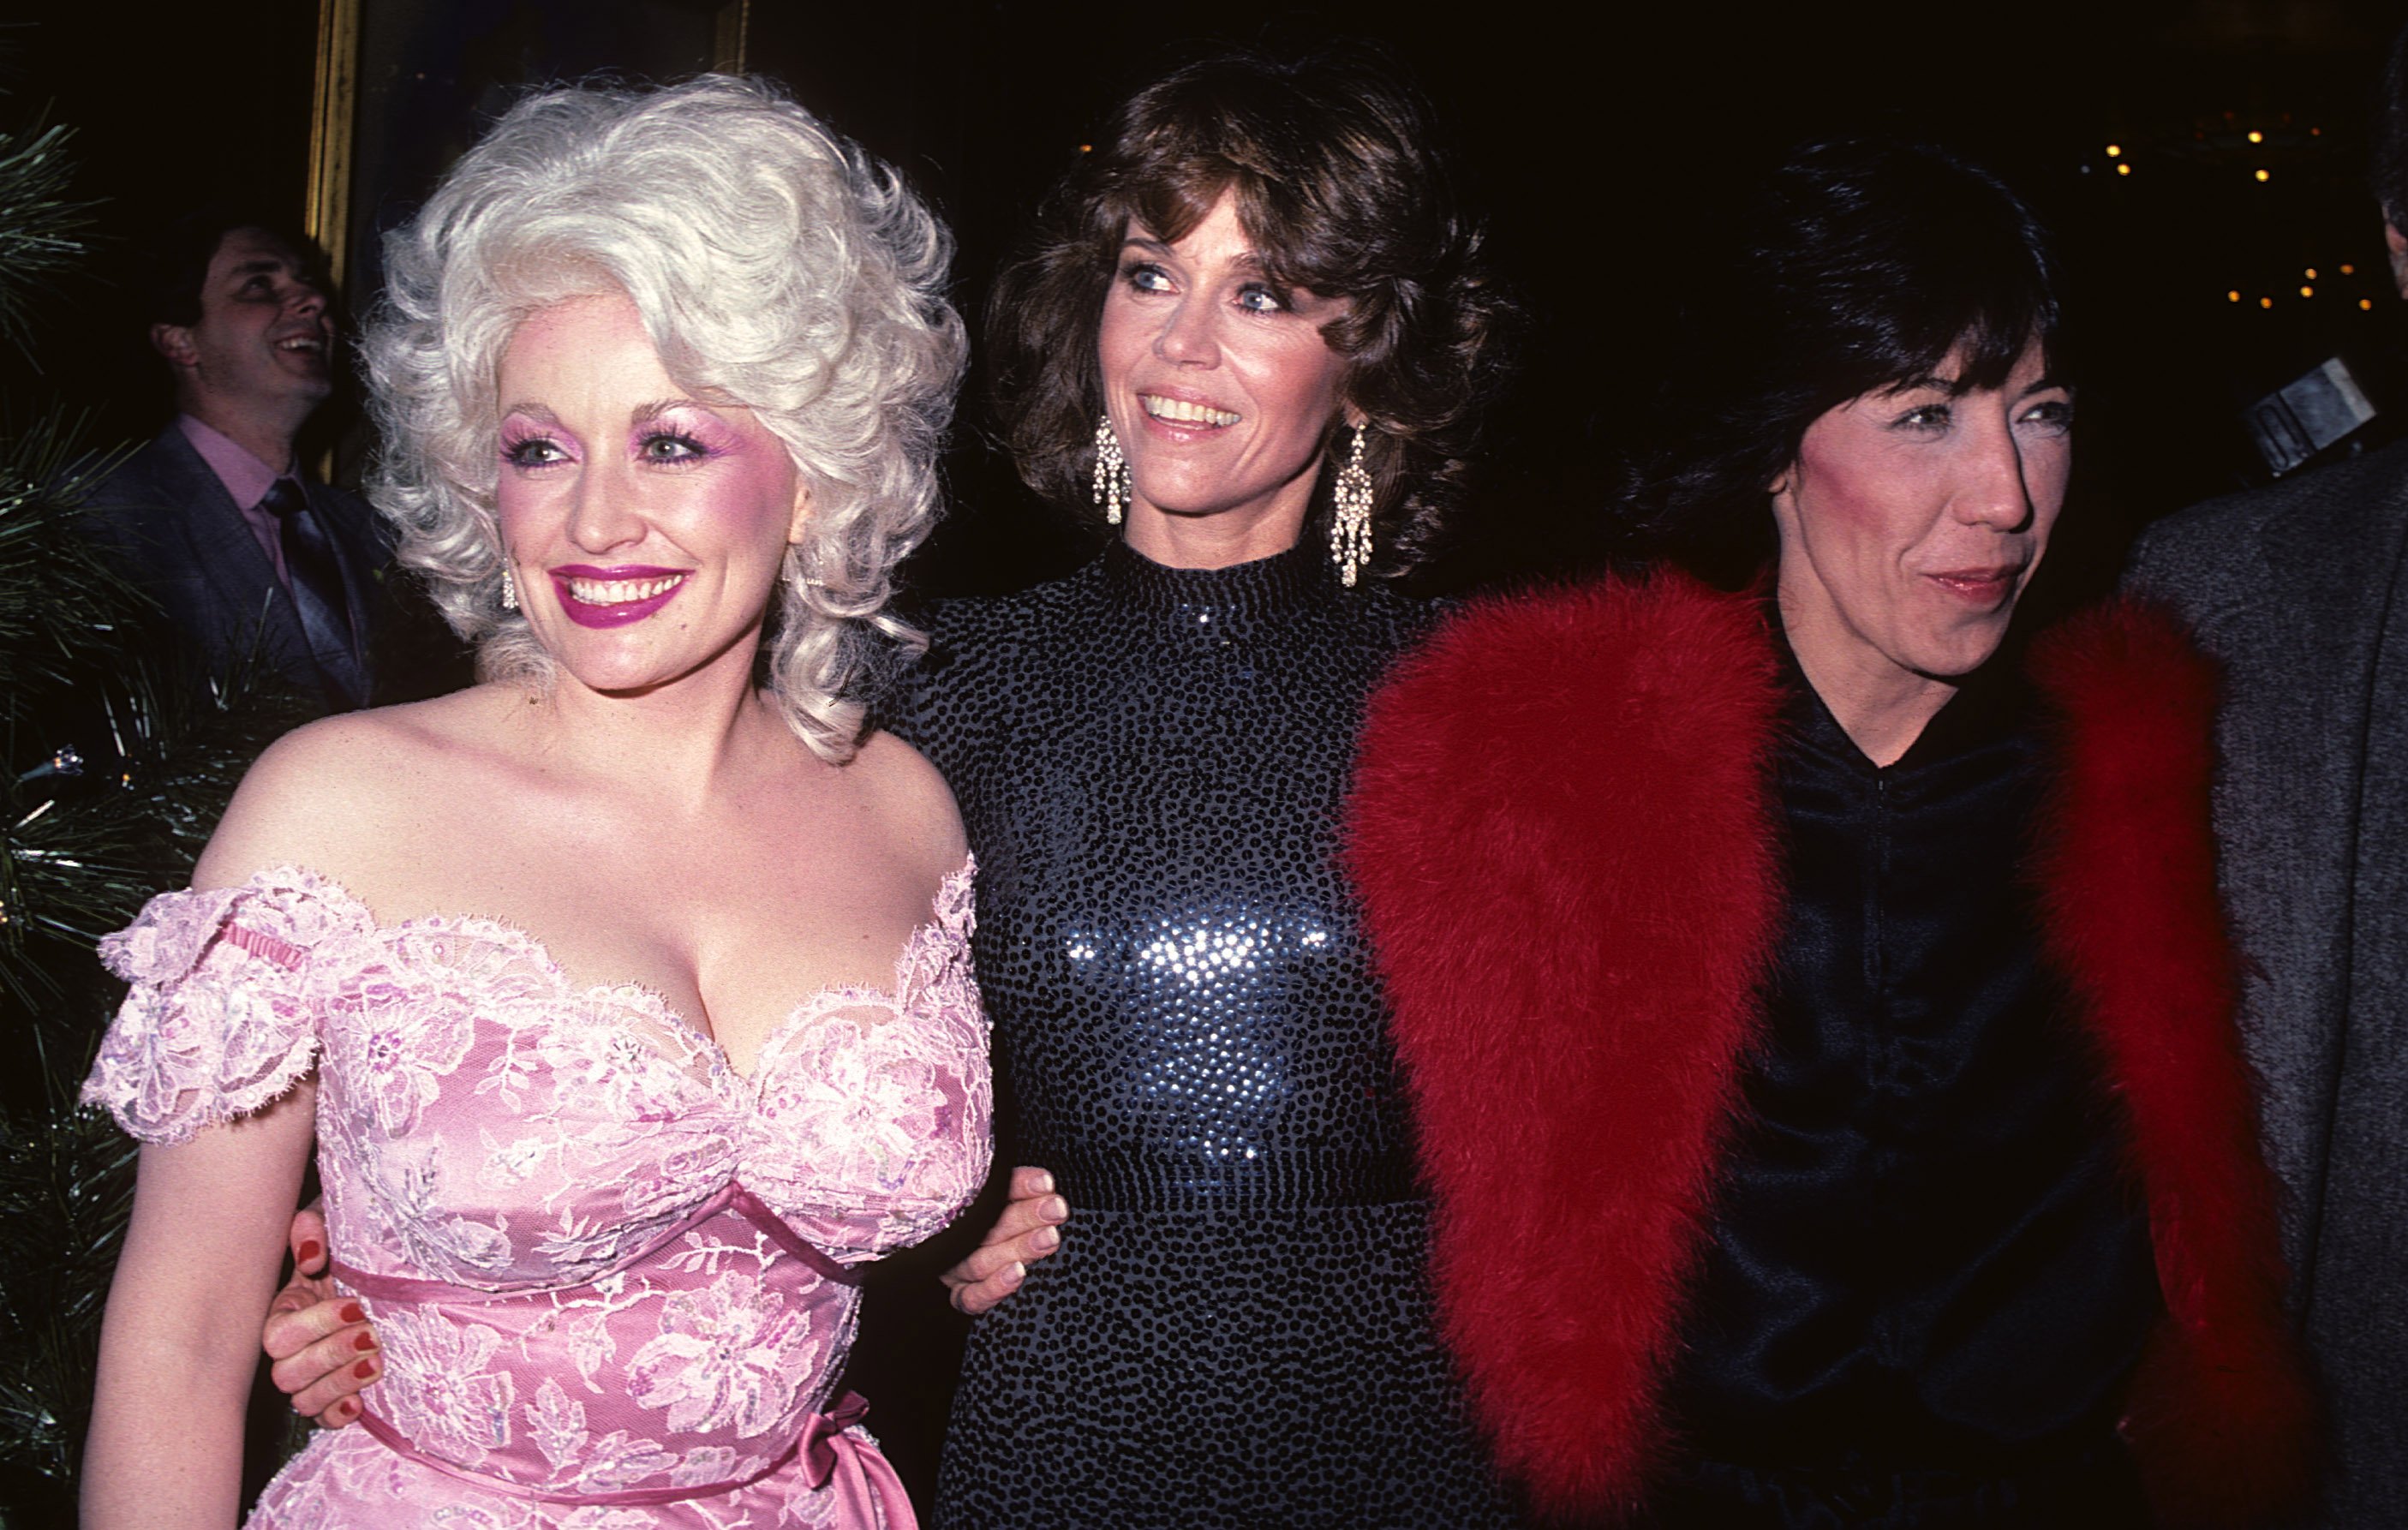 Dolly Parton, Jane Fonda and Lily Tomlin at the film premiere of '9 to 5,' New York, December 5th 1980.